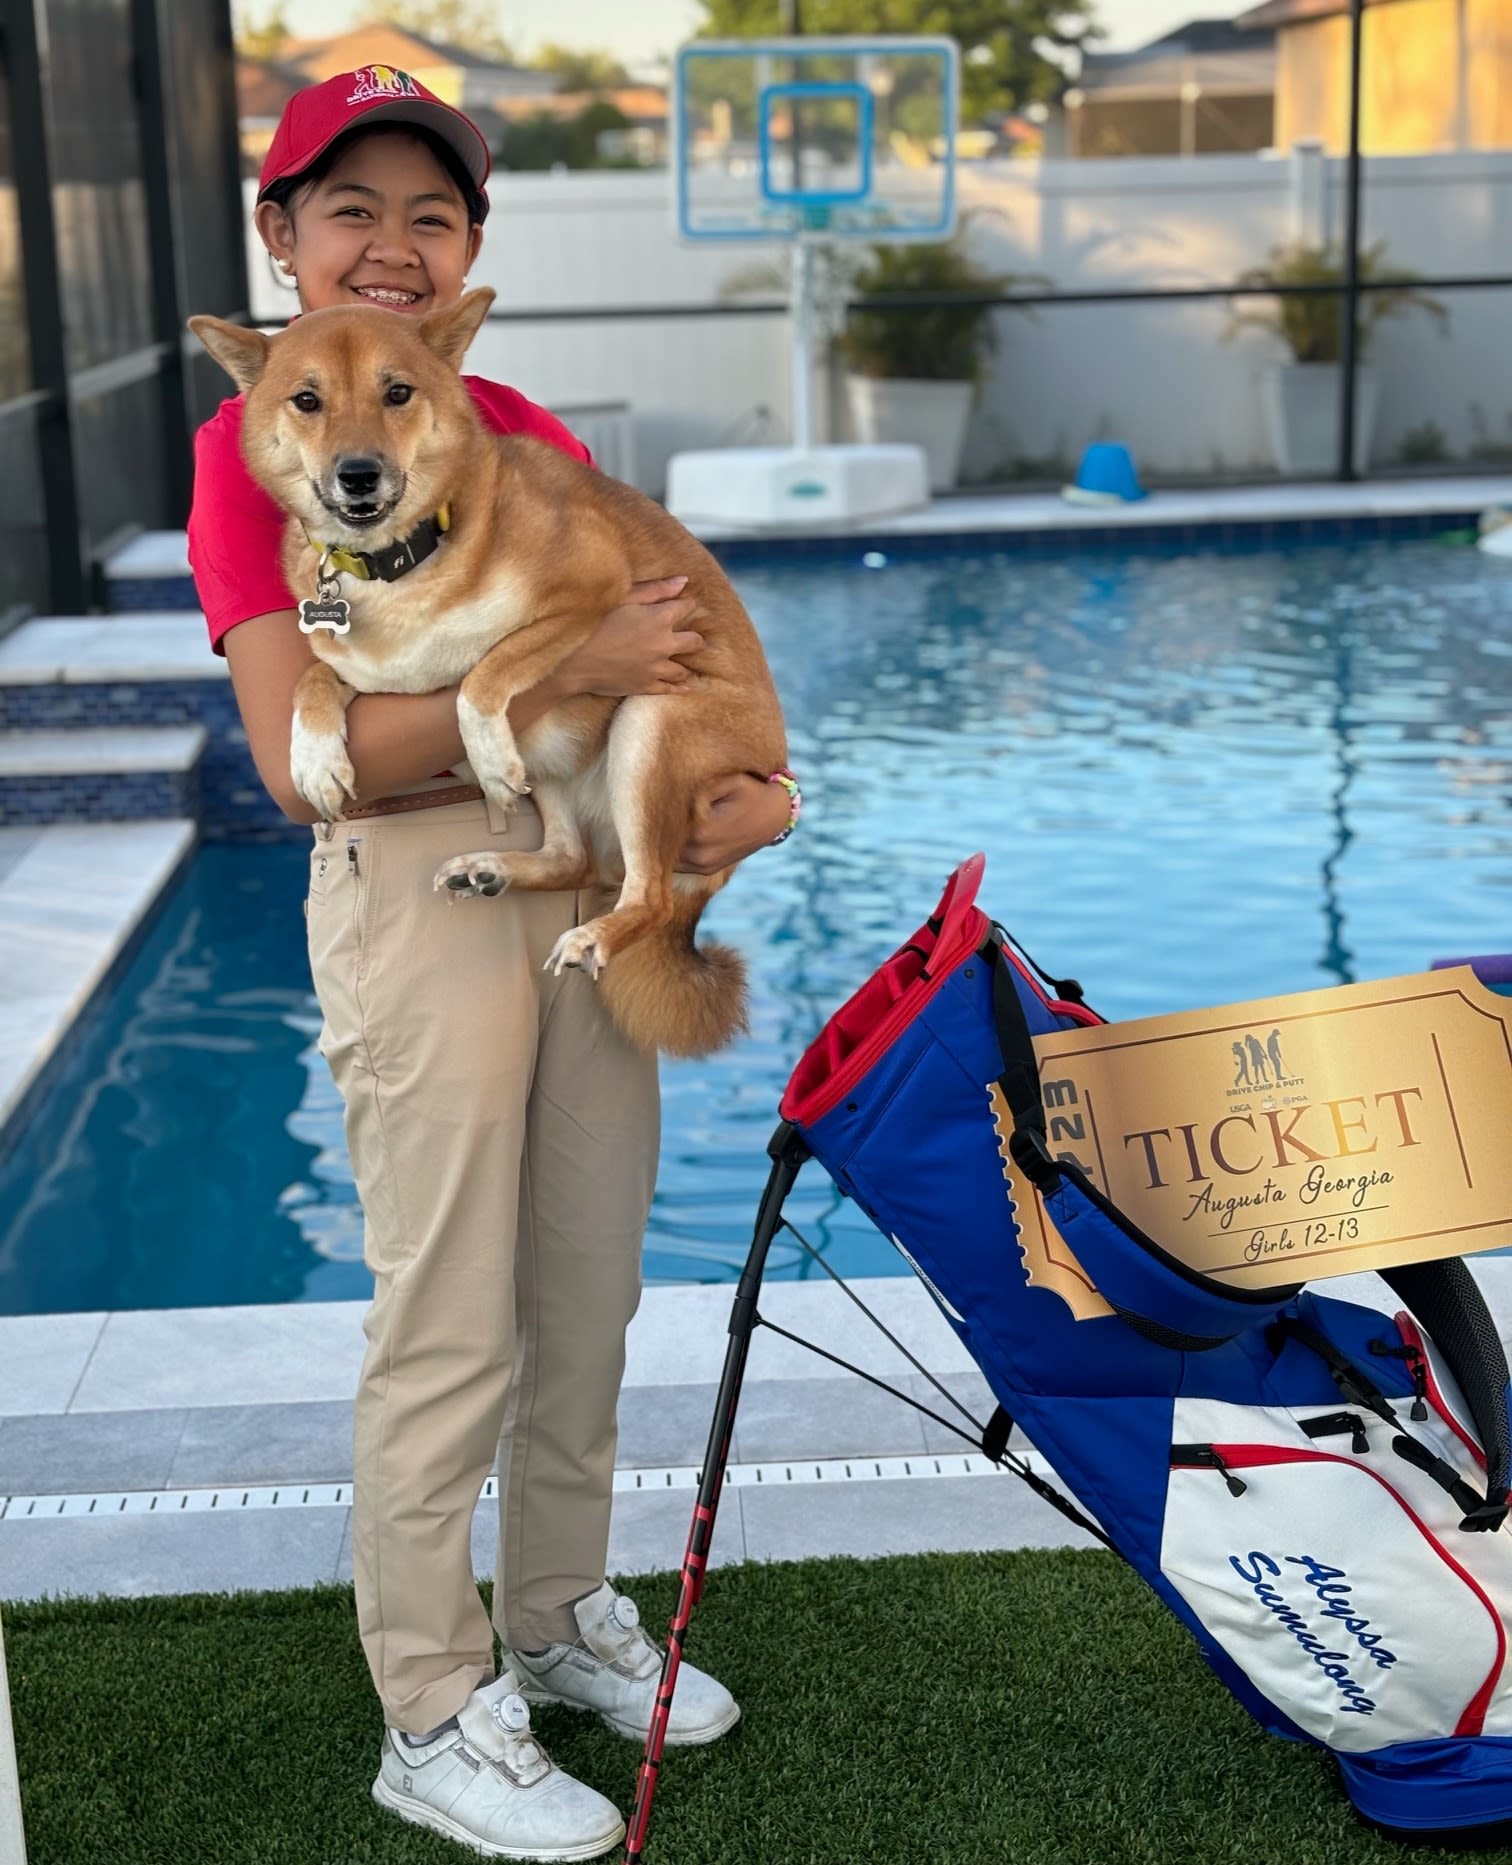 Alyssa with her dog and National Finals ticket prior to traveling to Augusta.